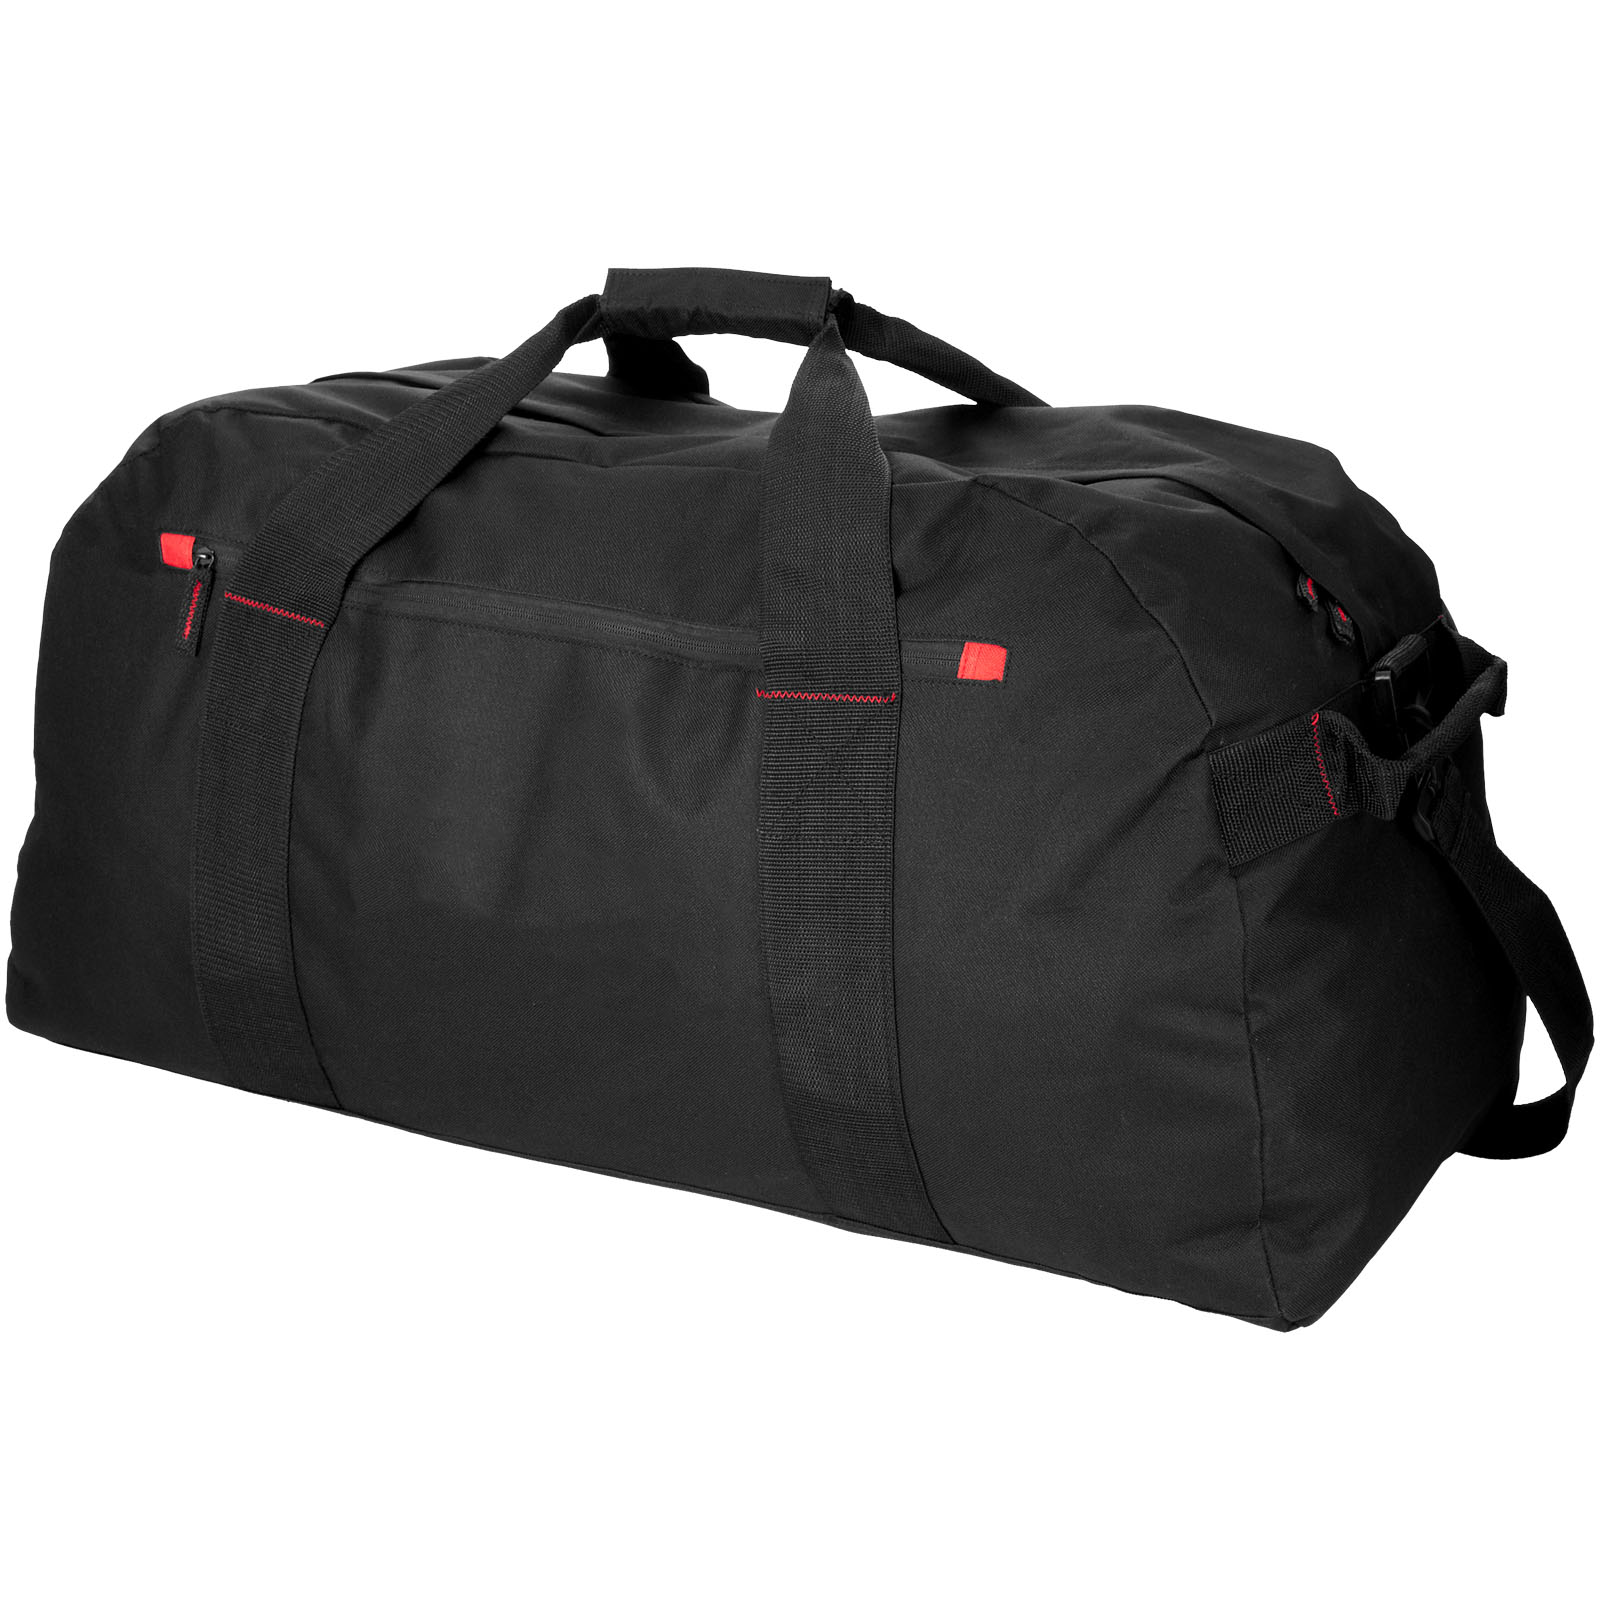 Advertising Sport & Gym bags - Vancouver extra large travel duffel bag 75L